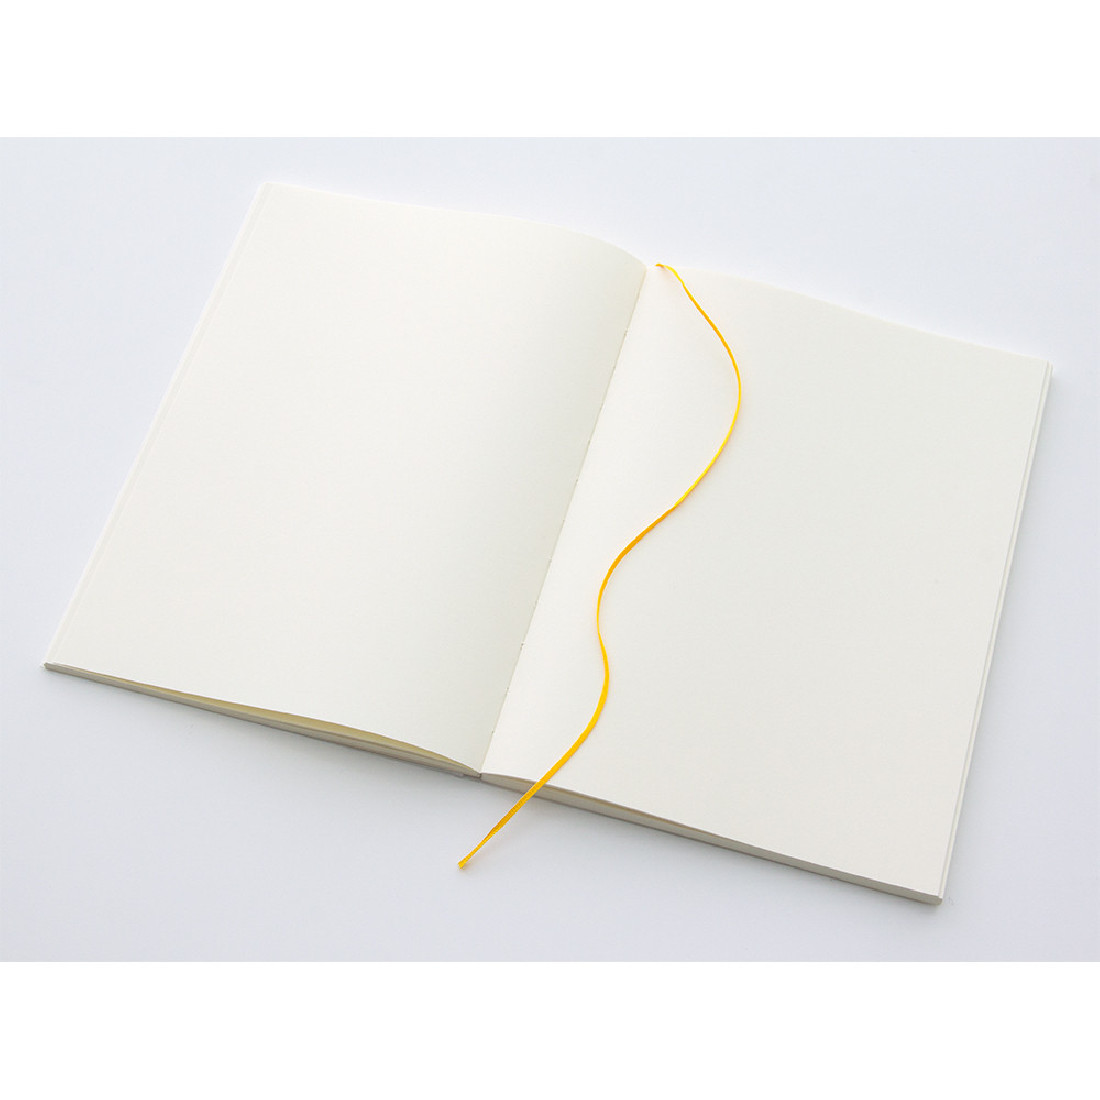 Midori MD Notebook A5 148x210 mm, 176 pages, glassine paper cover, Blank, Bookmark string, Label stickers, Thread-stitched book-binding 15293006